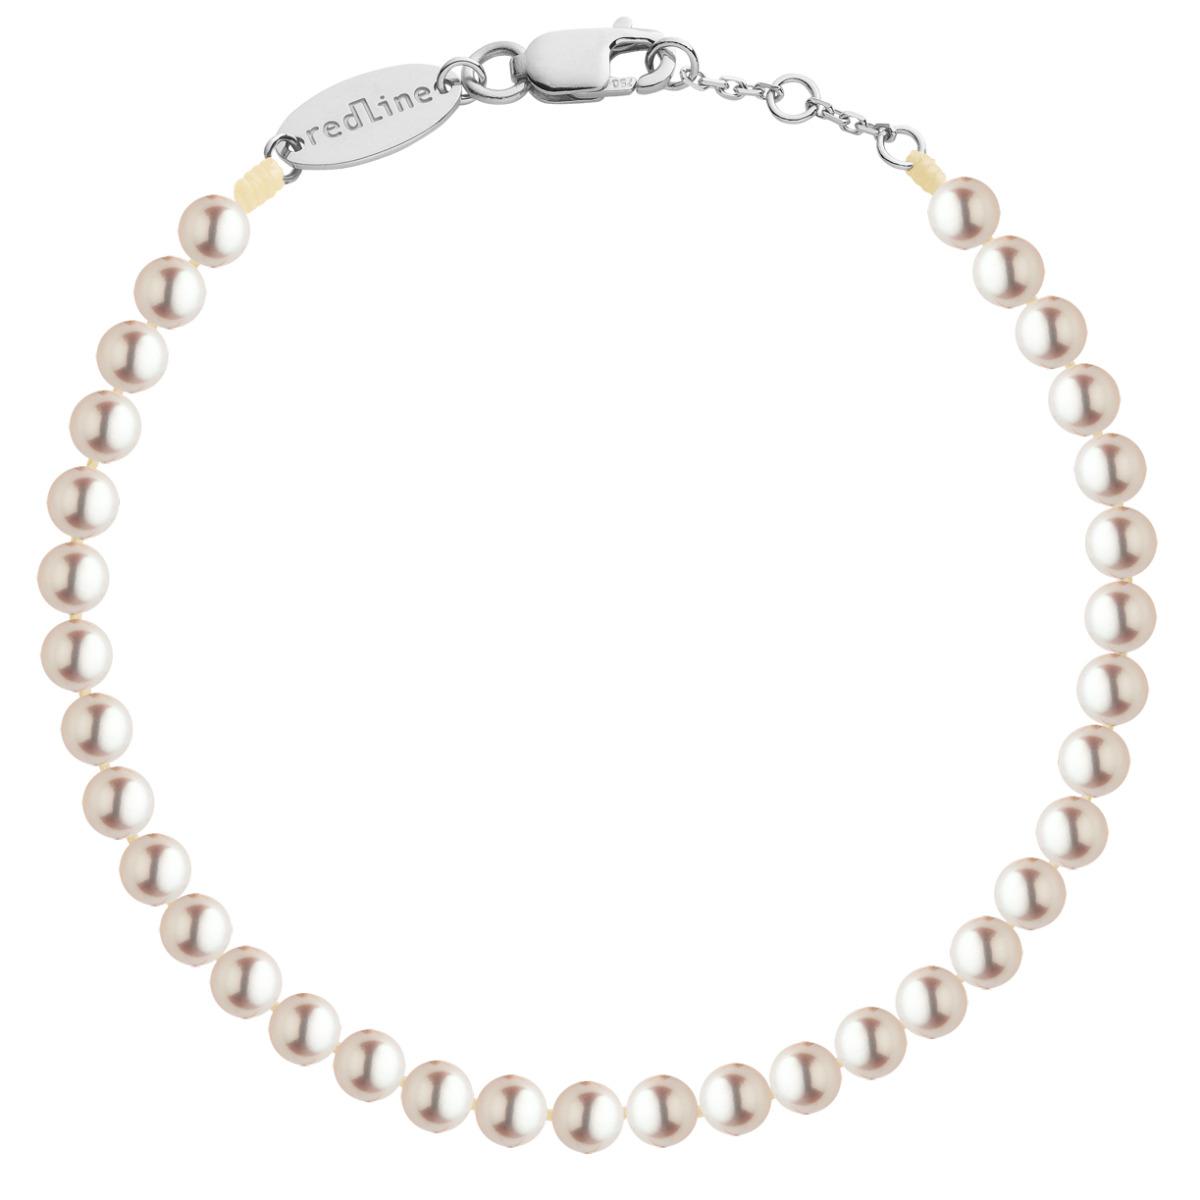 Vintage Fine Jewellery Second Hand 18ct Gold Clasp Single Row Pearl Bracelet,  Dated London 1992 at John Lewis & Partners